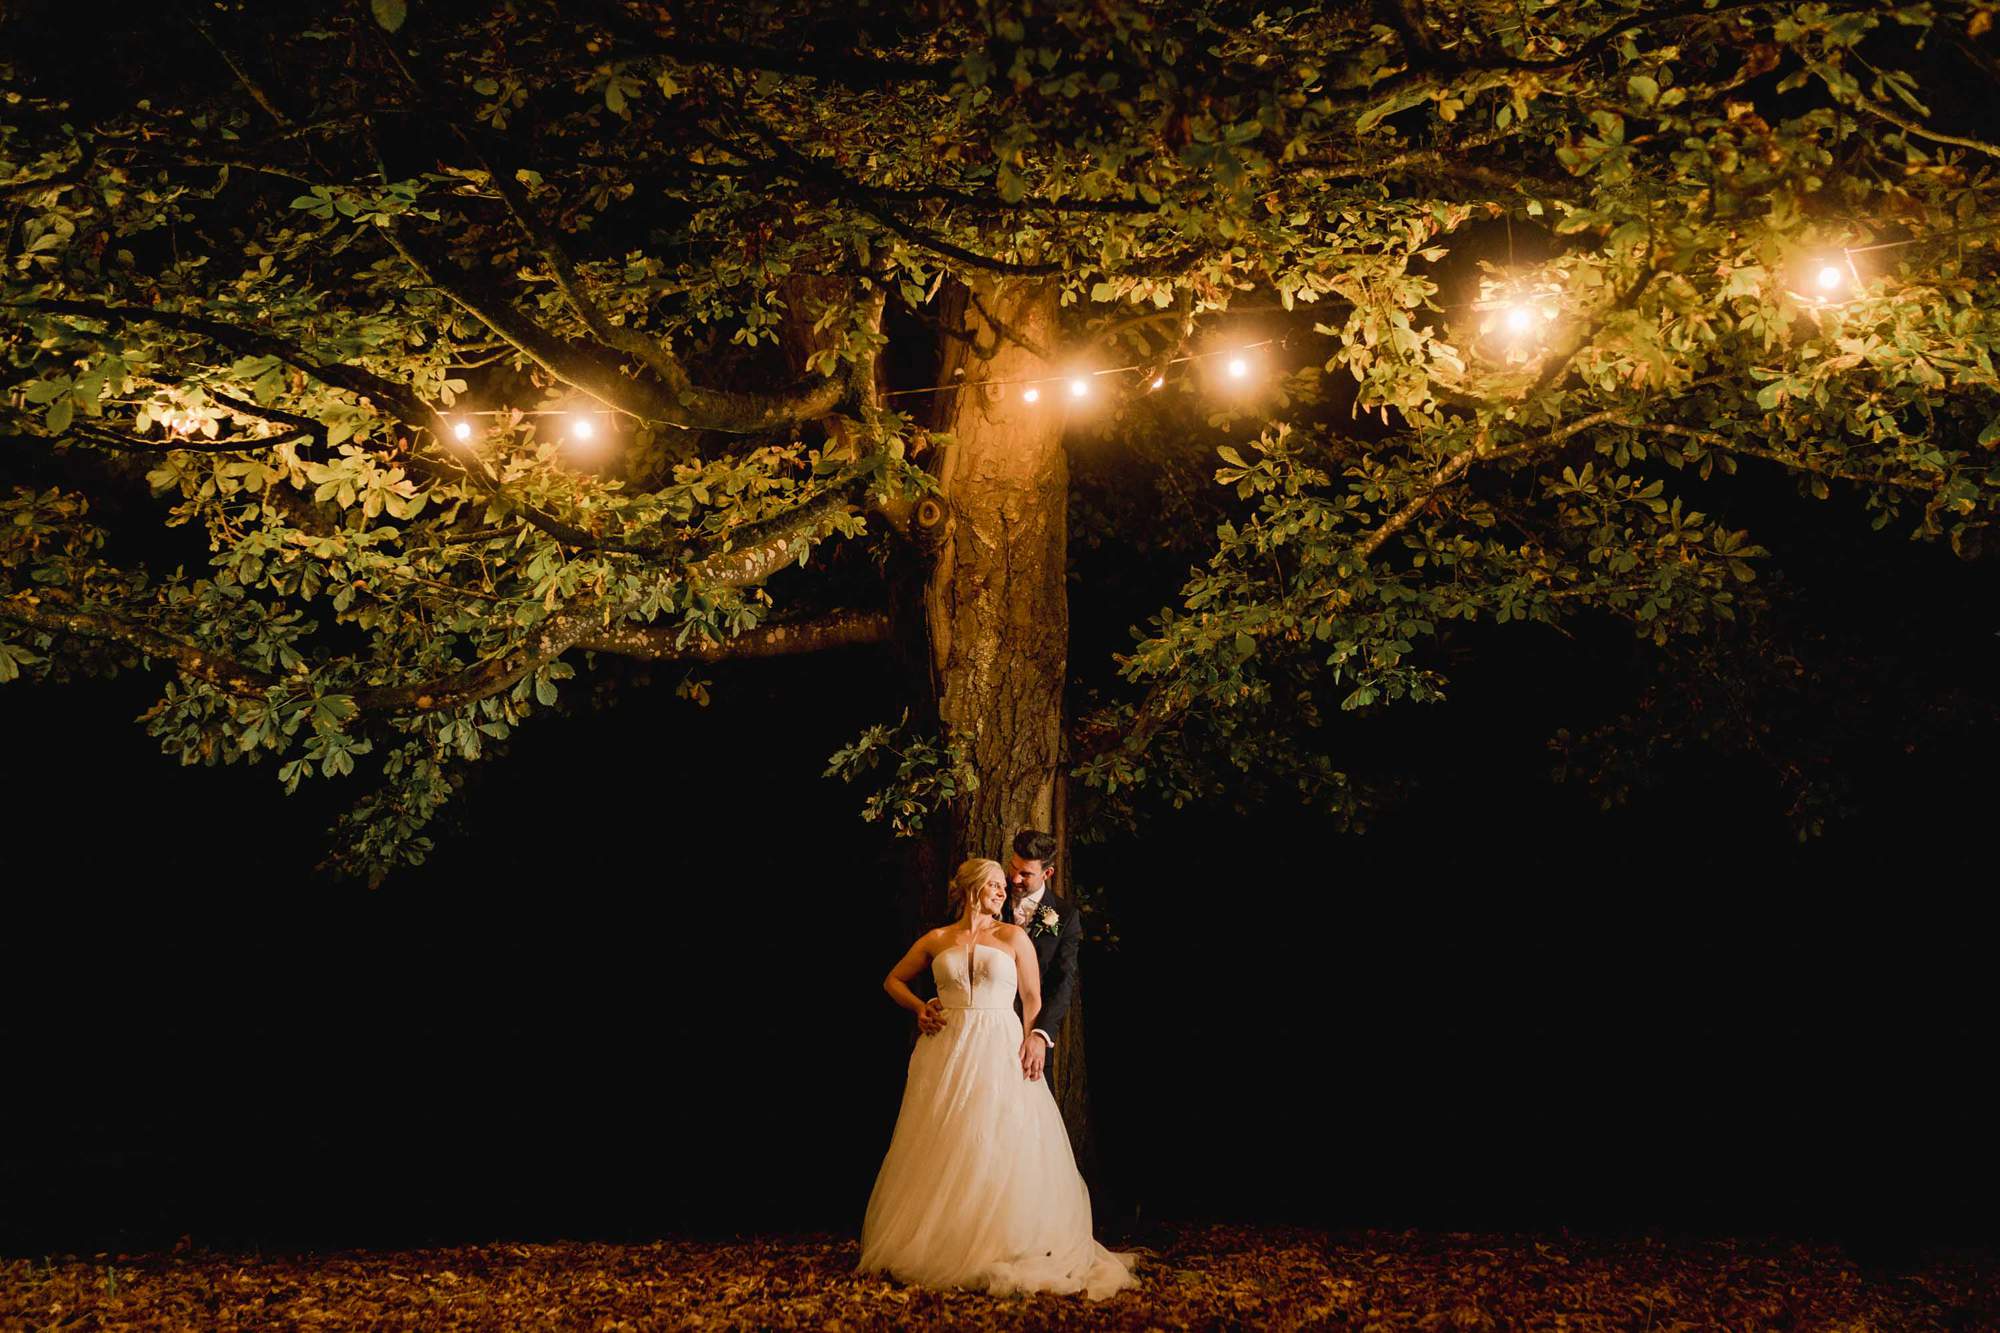 Evening time with the bride and groom under a tree with fairy lights at Lainston House.